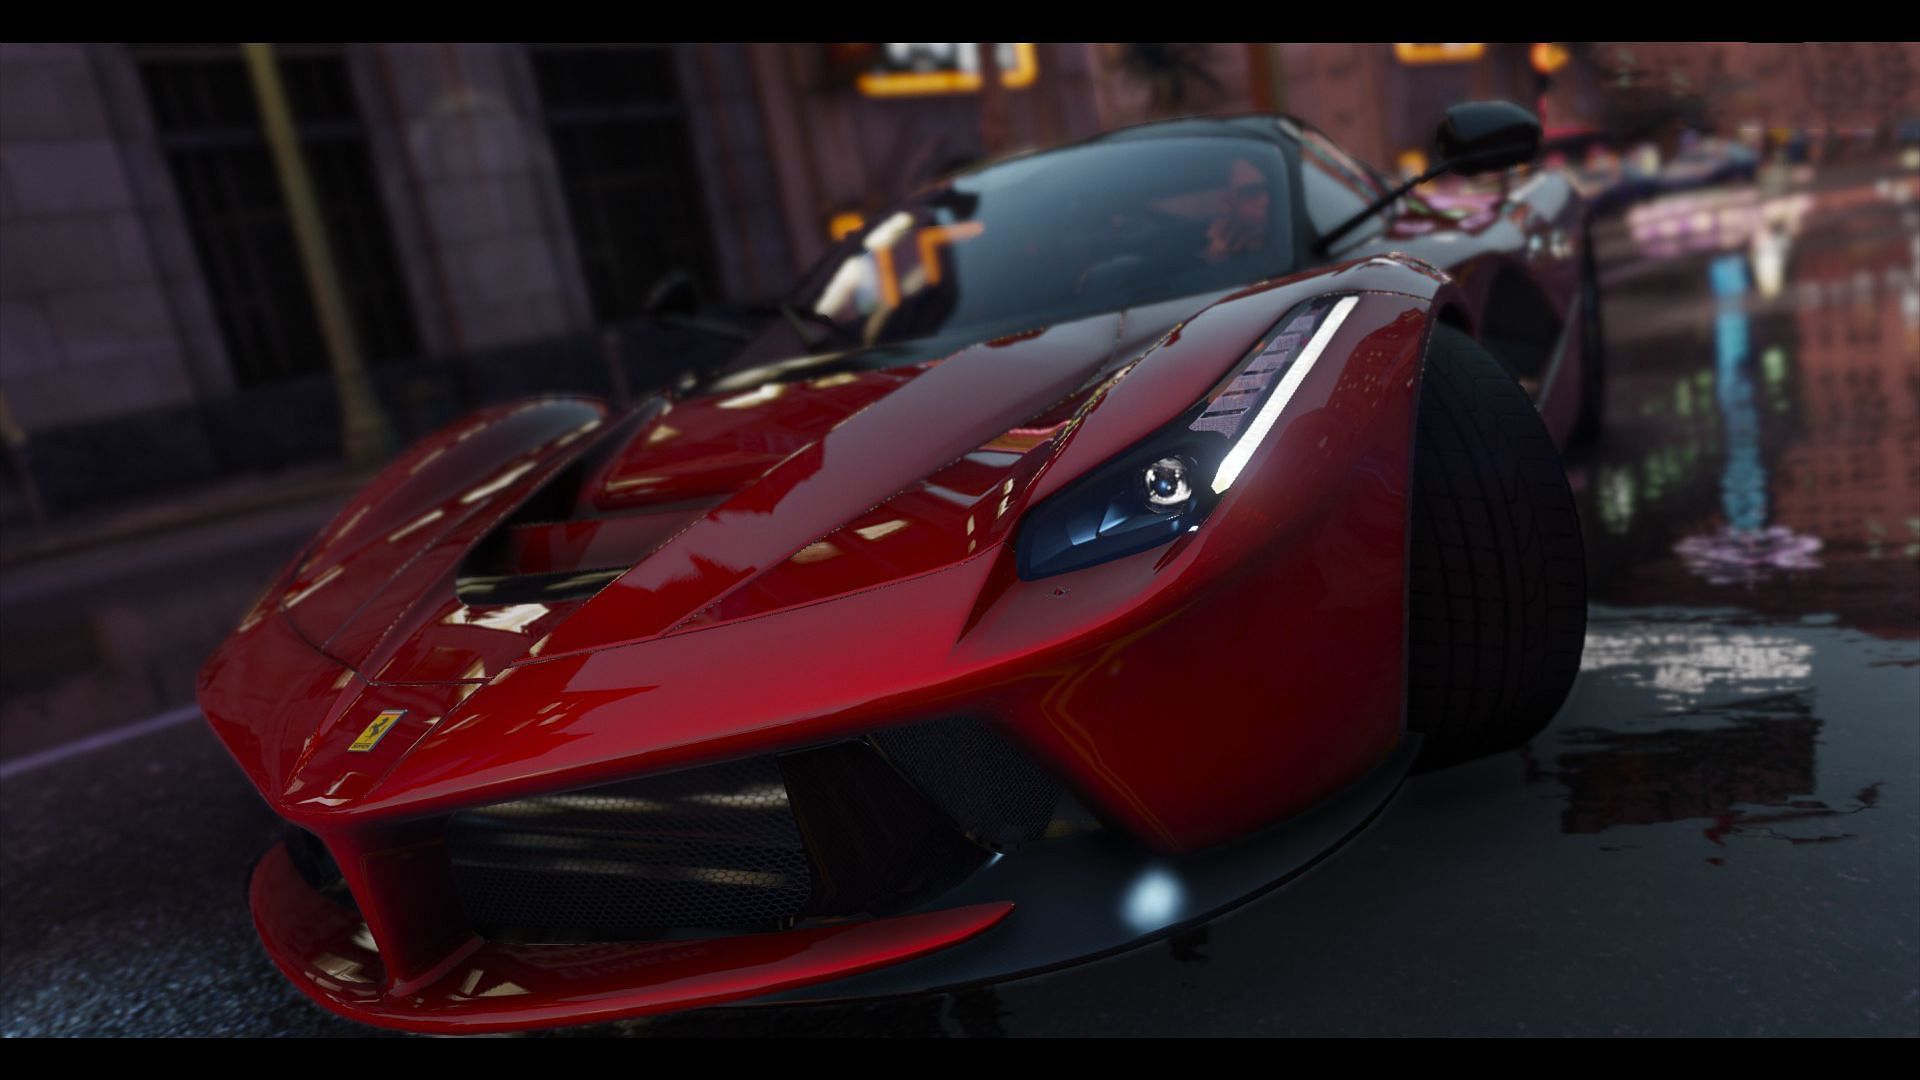 This mod adds a beautiful car to the game (Image via gta5-mods/Vans123)